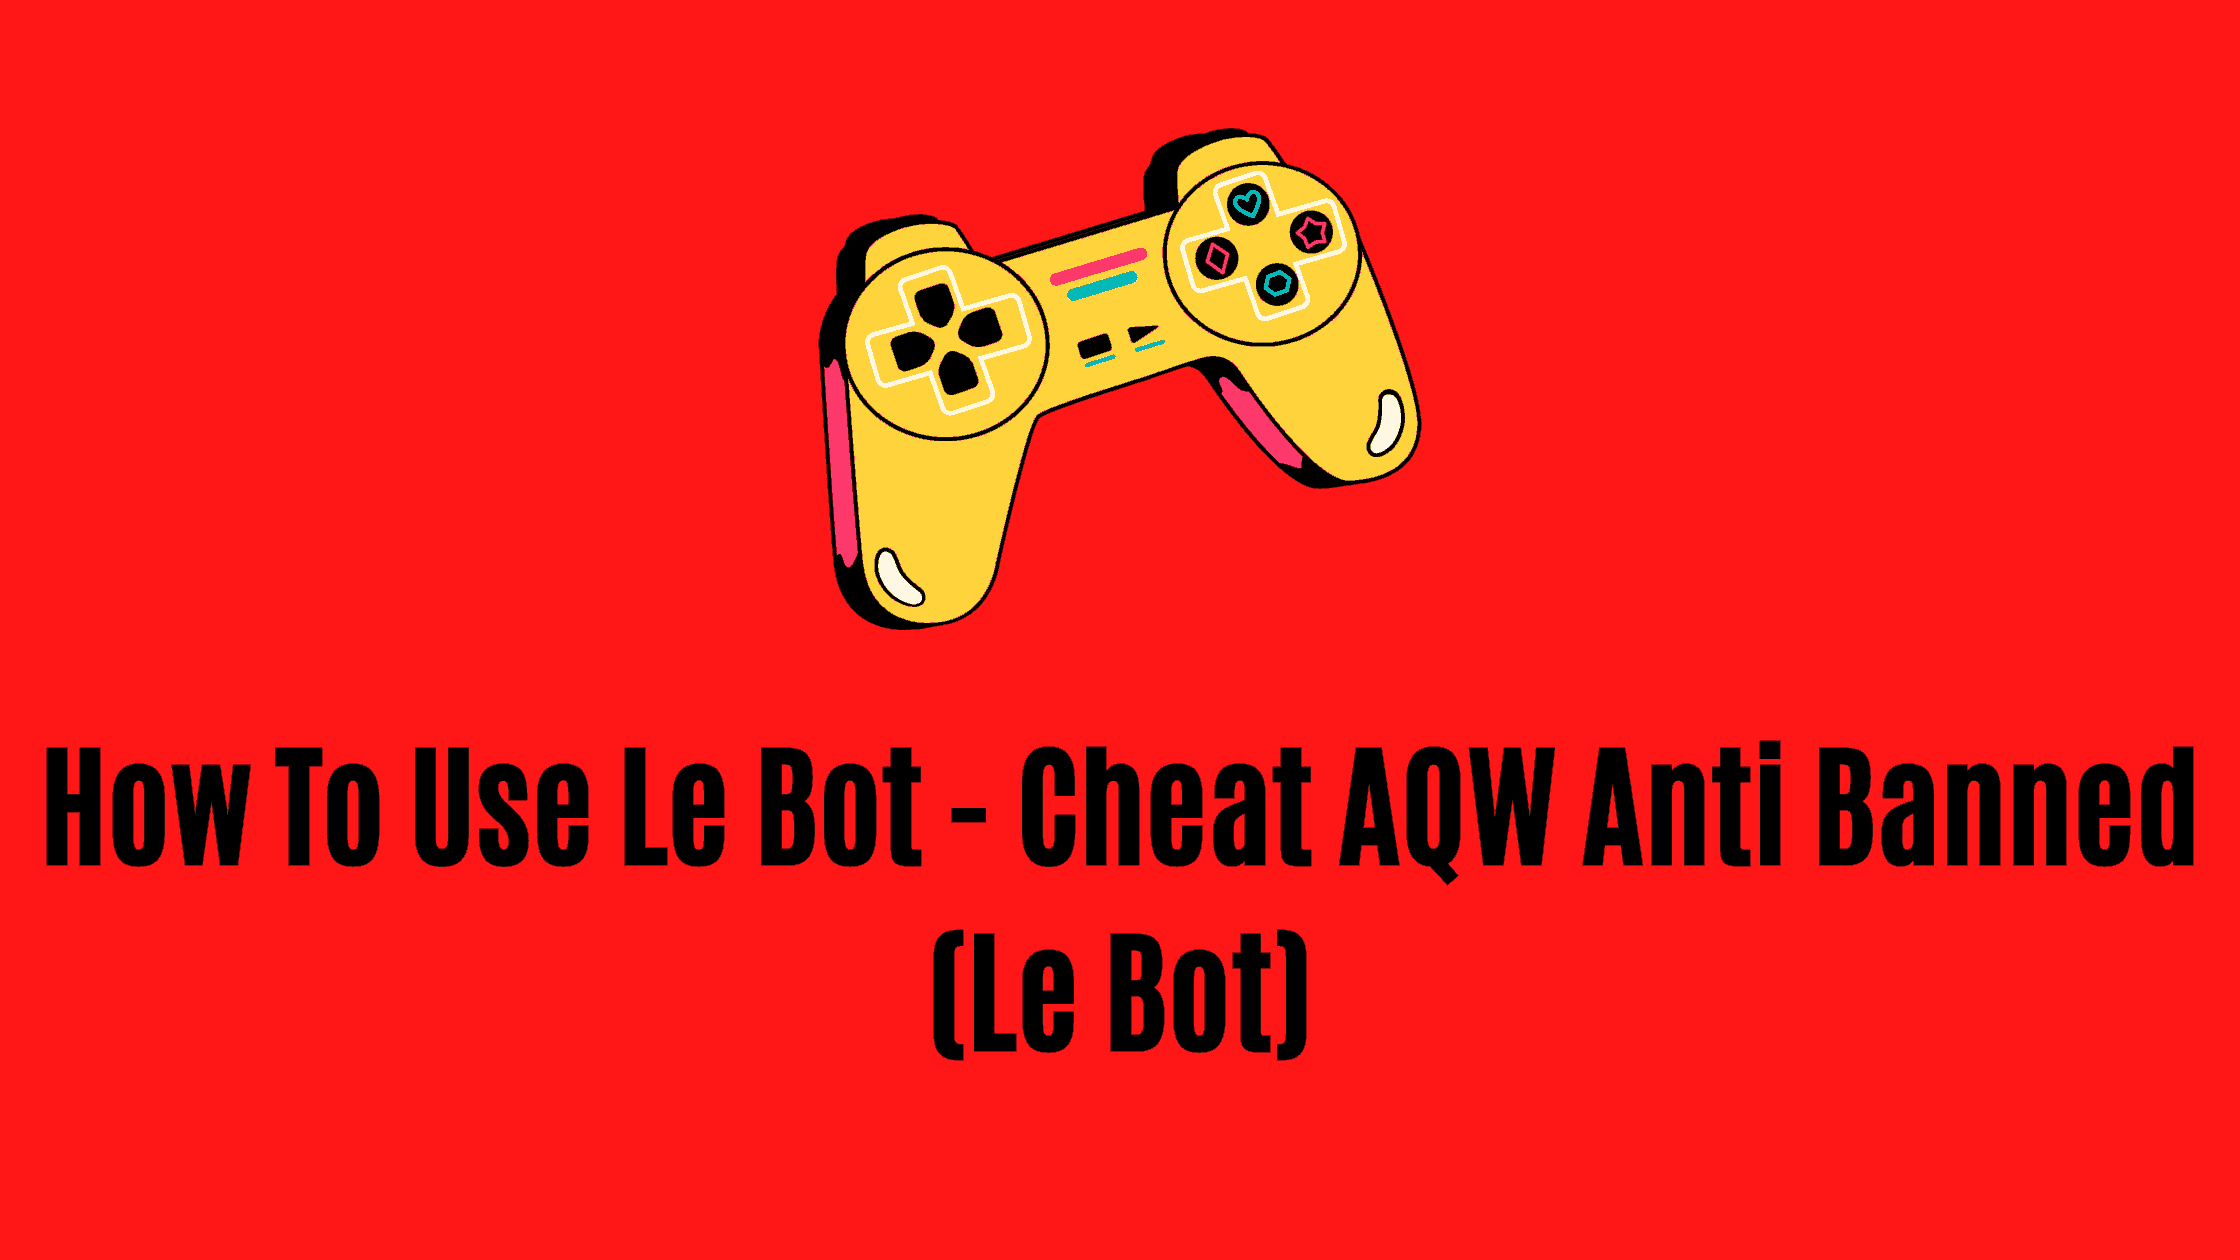 How To Use Le Bot - Cheat AQW Anti Banned (Le Bot)